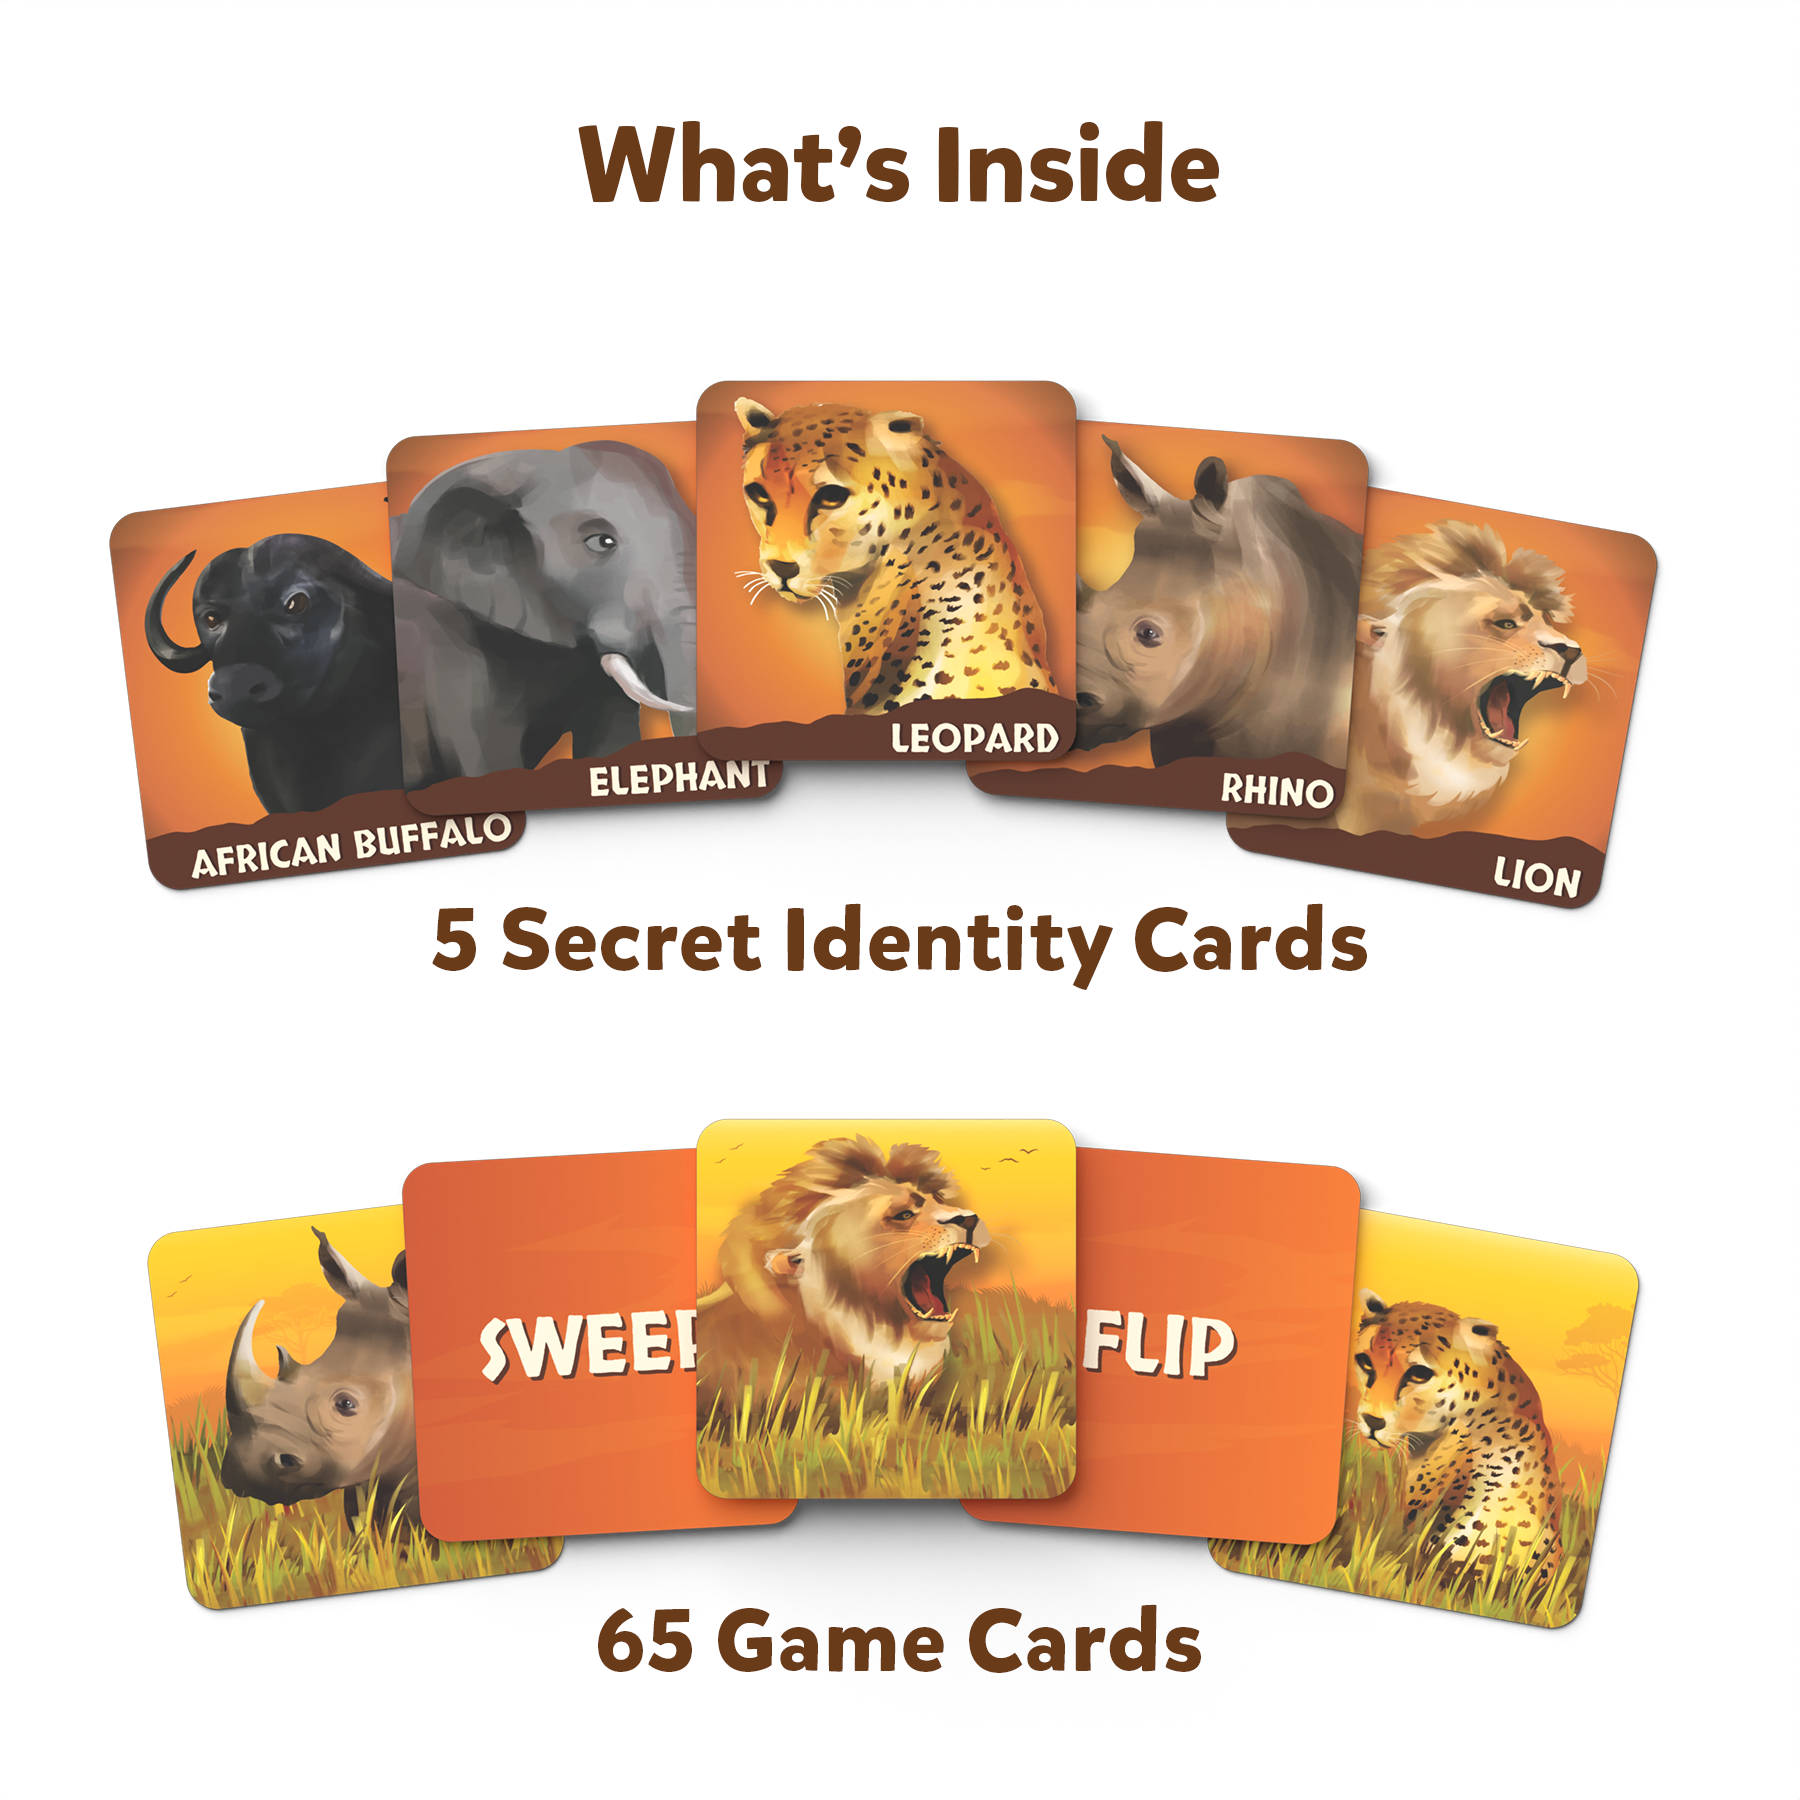 Skillmatics Card Game - The Big 5, Animal Themed Game of Secret Identities & Strategic Card-Flipping, Family Friendly Game, Ages 6 and Up